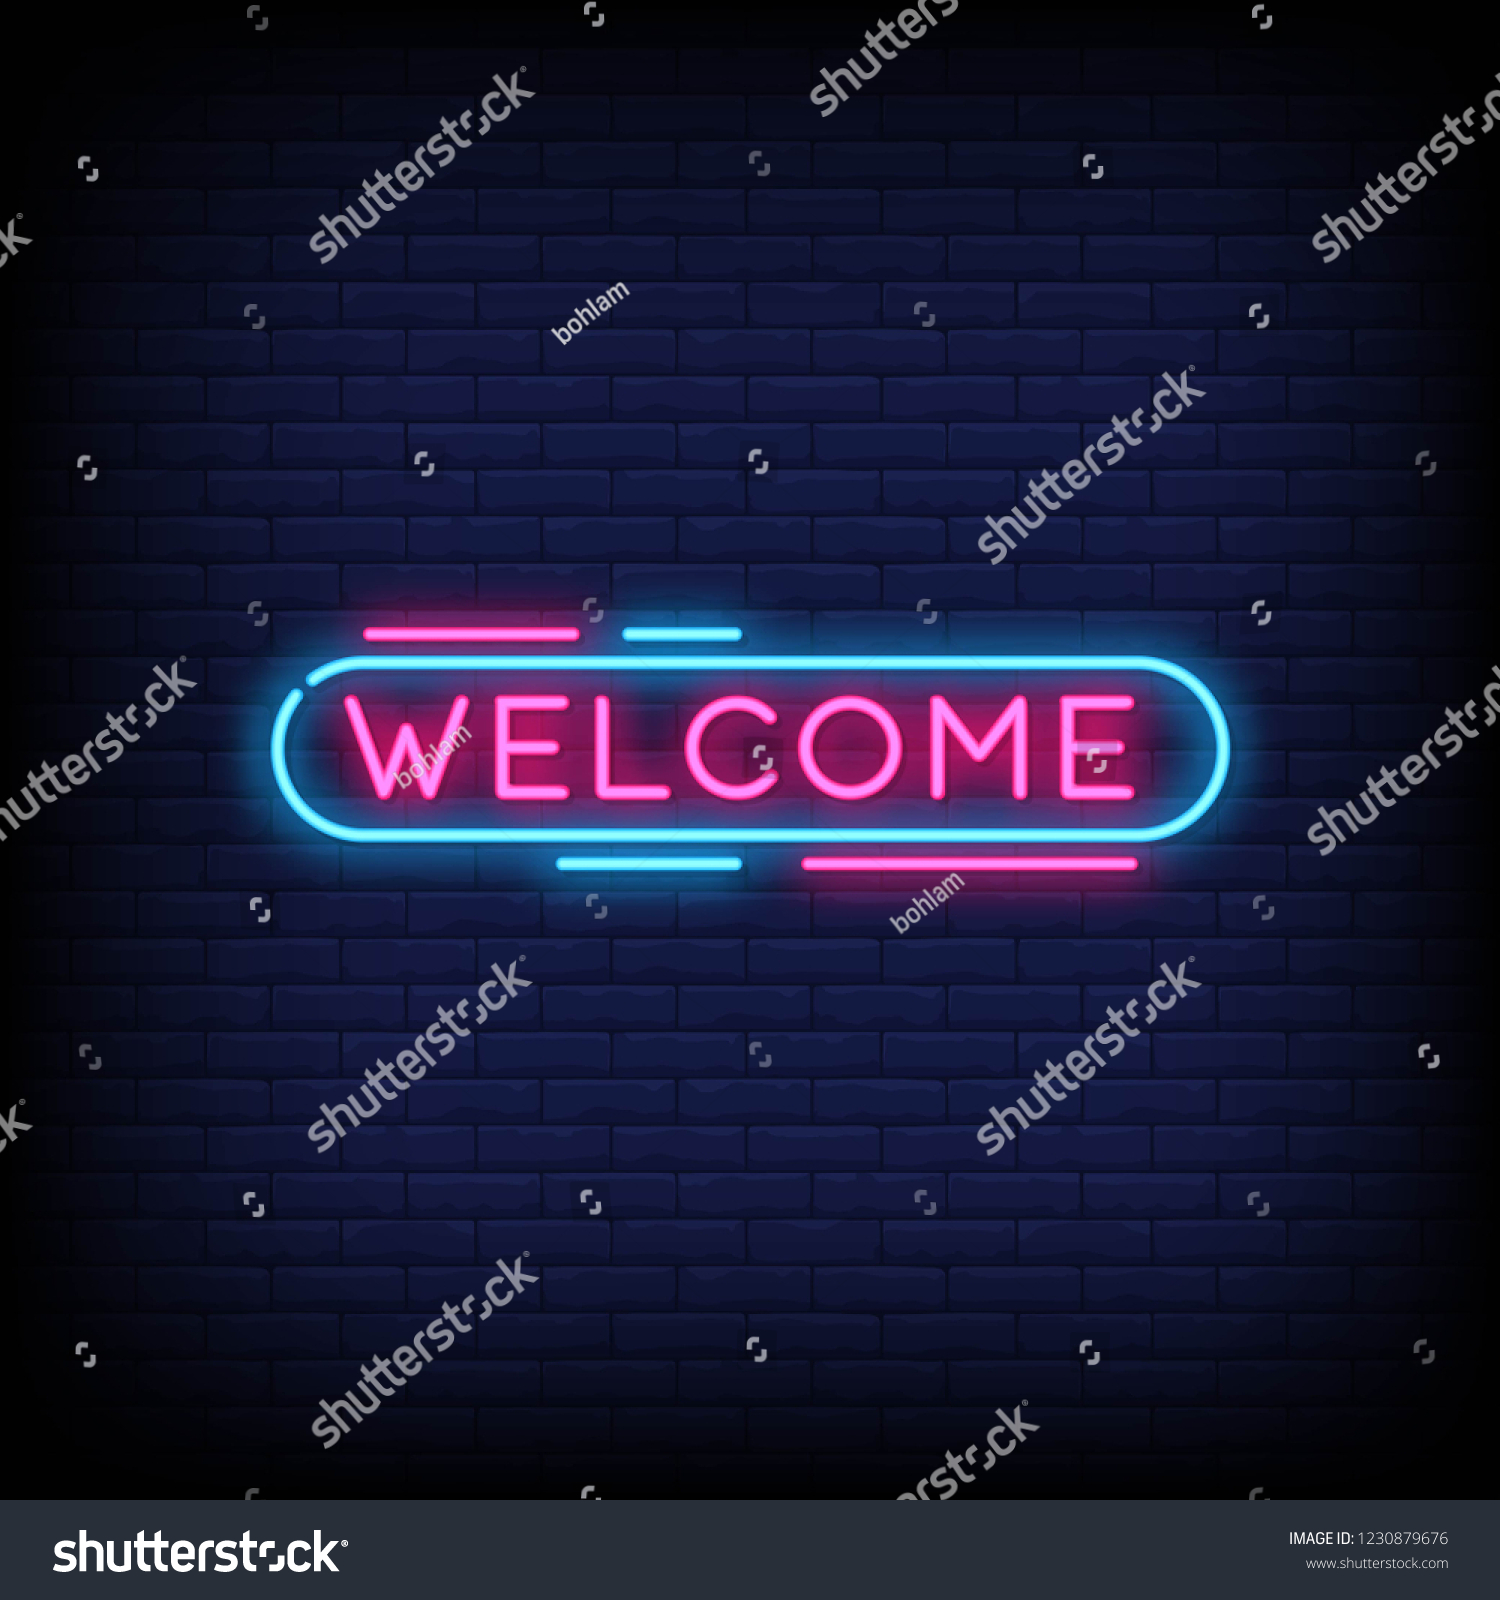 Welcome Neon Text Brick Wall Background Stock Vector (Royalty Free ...